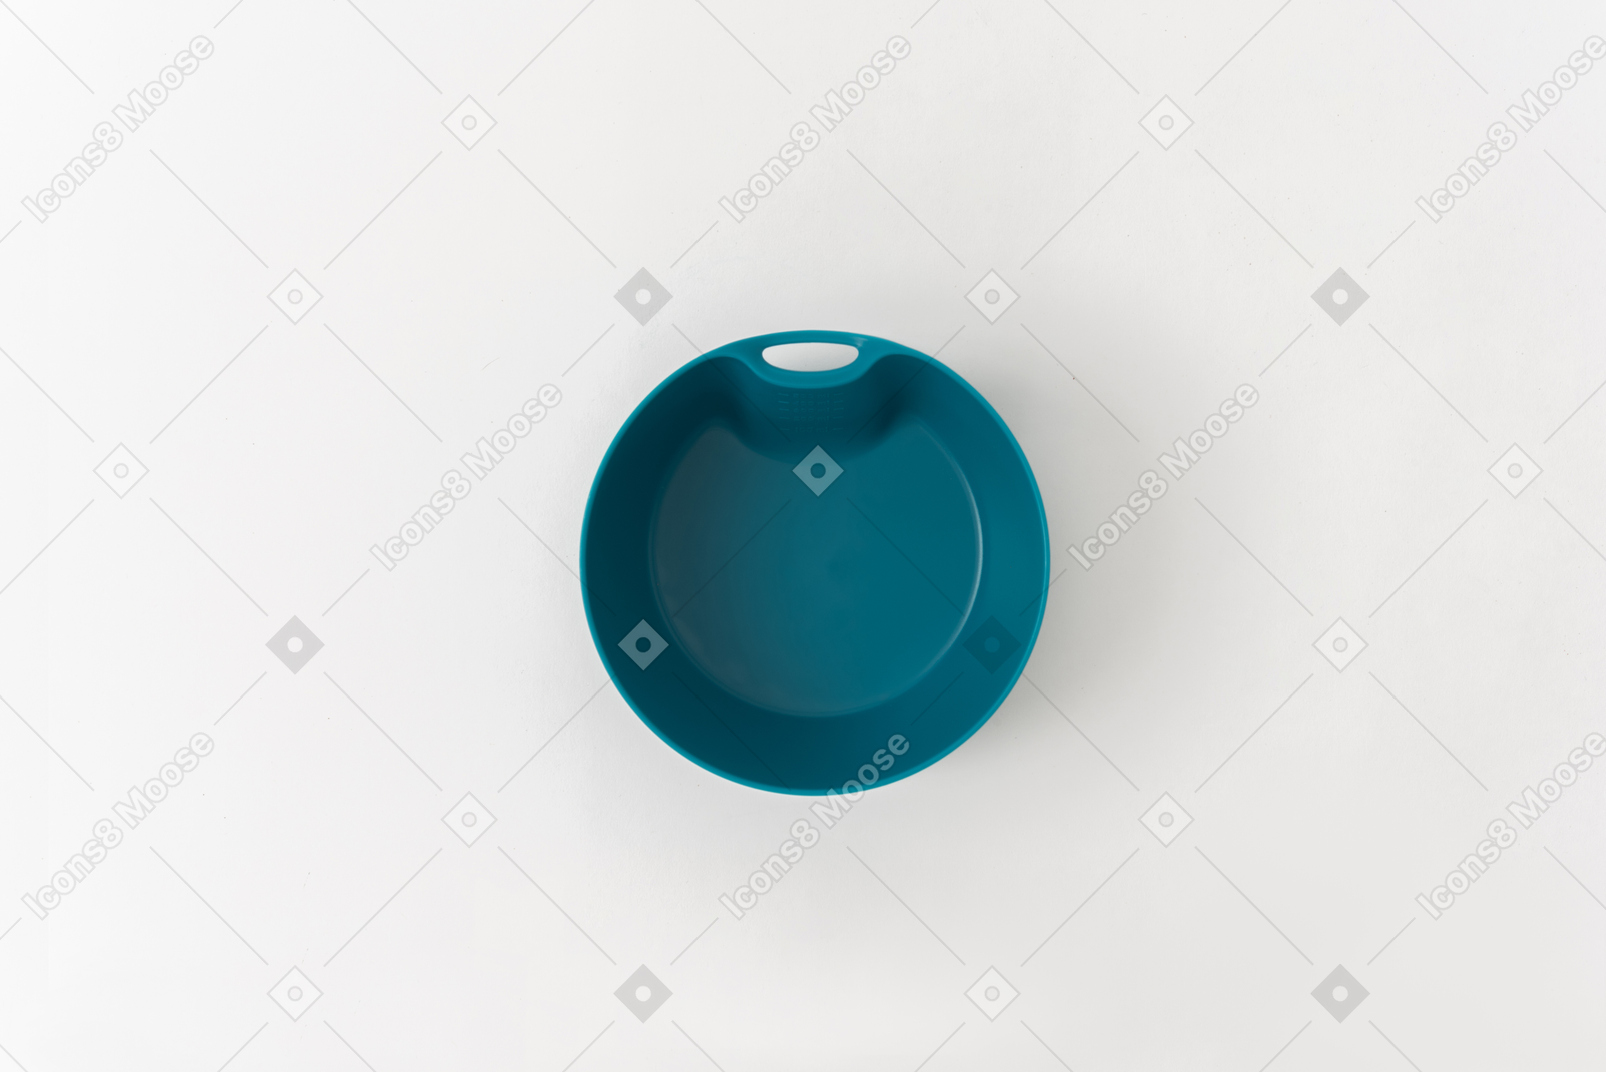 Blue plate on white background